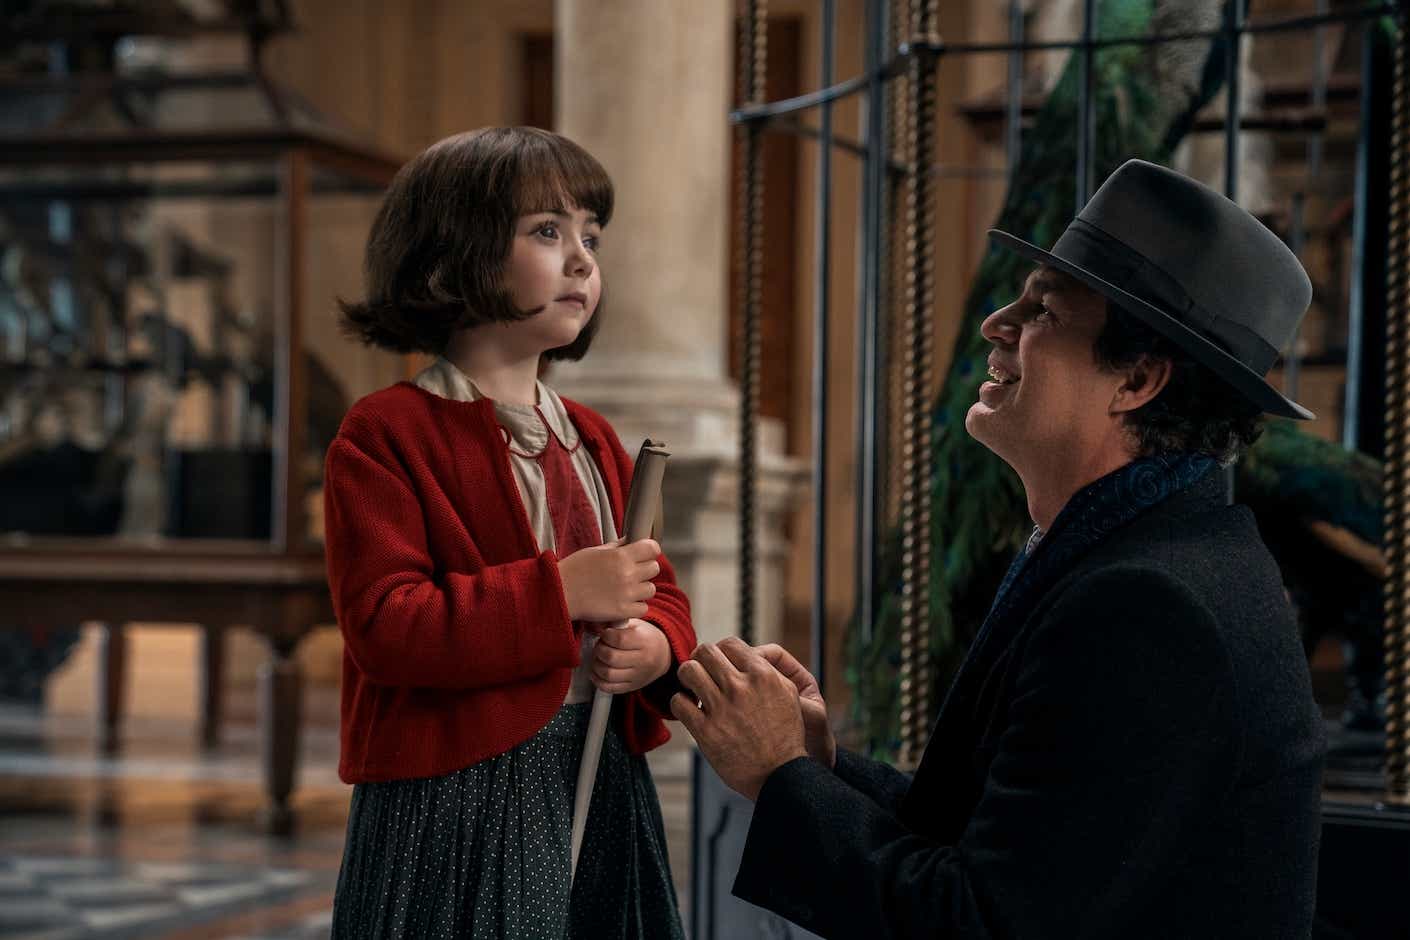 Nell Sutton as Young Marie-Laure, Mark Ruffalo as Daniel LeBlanc in episode 101 of All the Light We Cannot See.